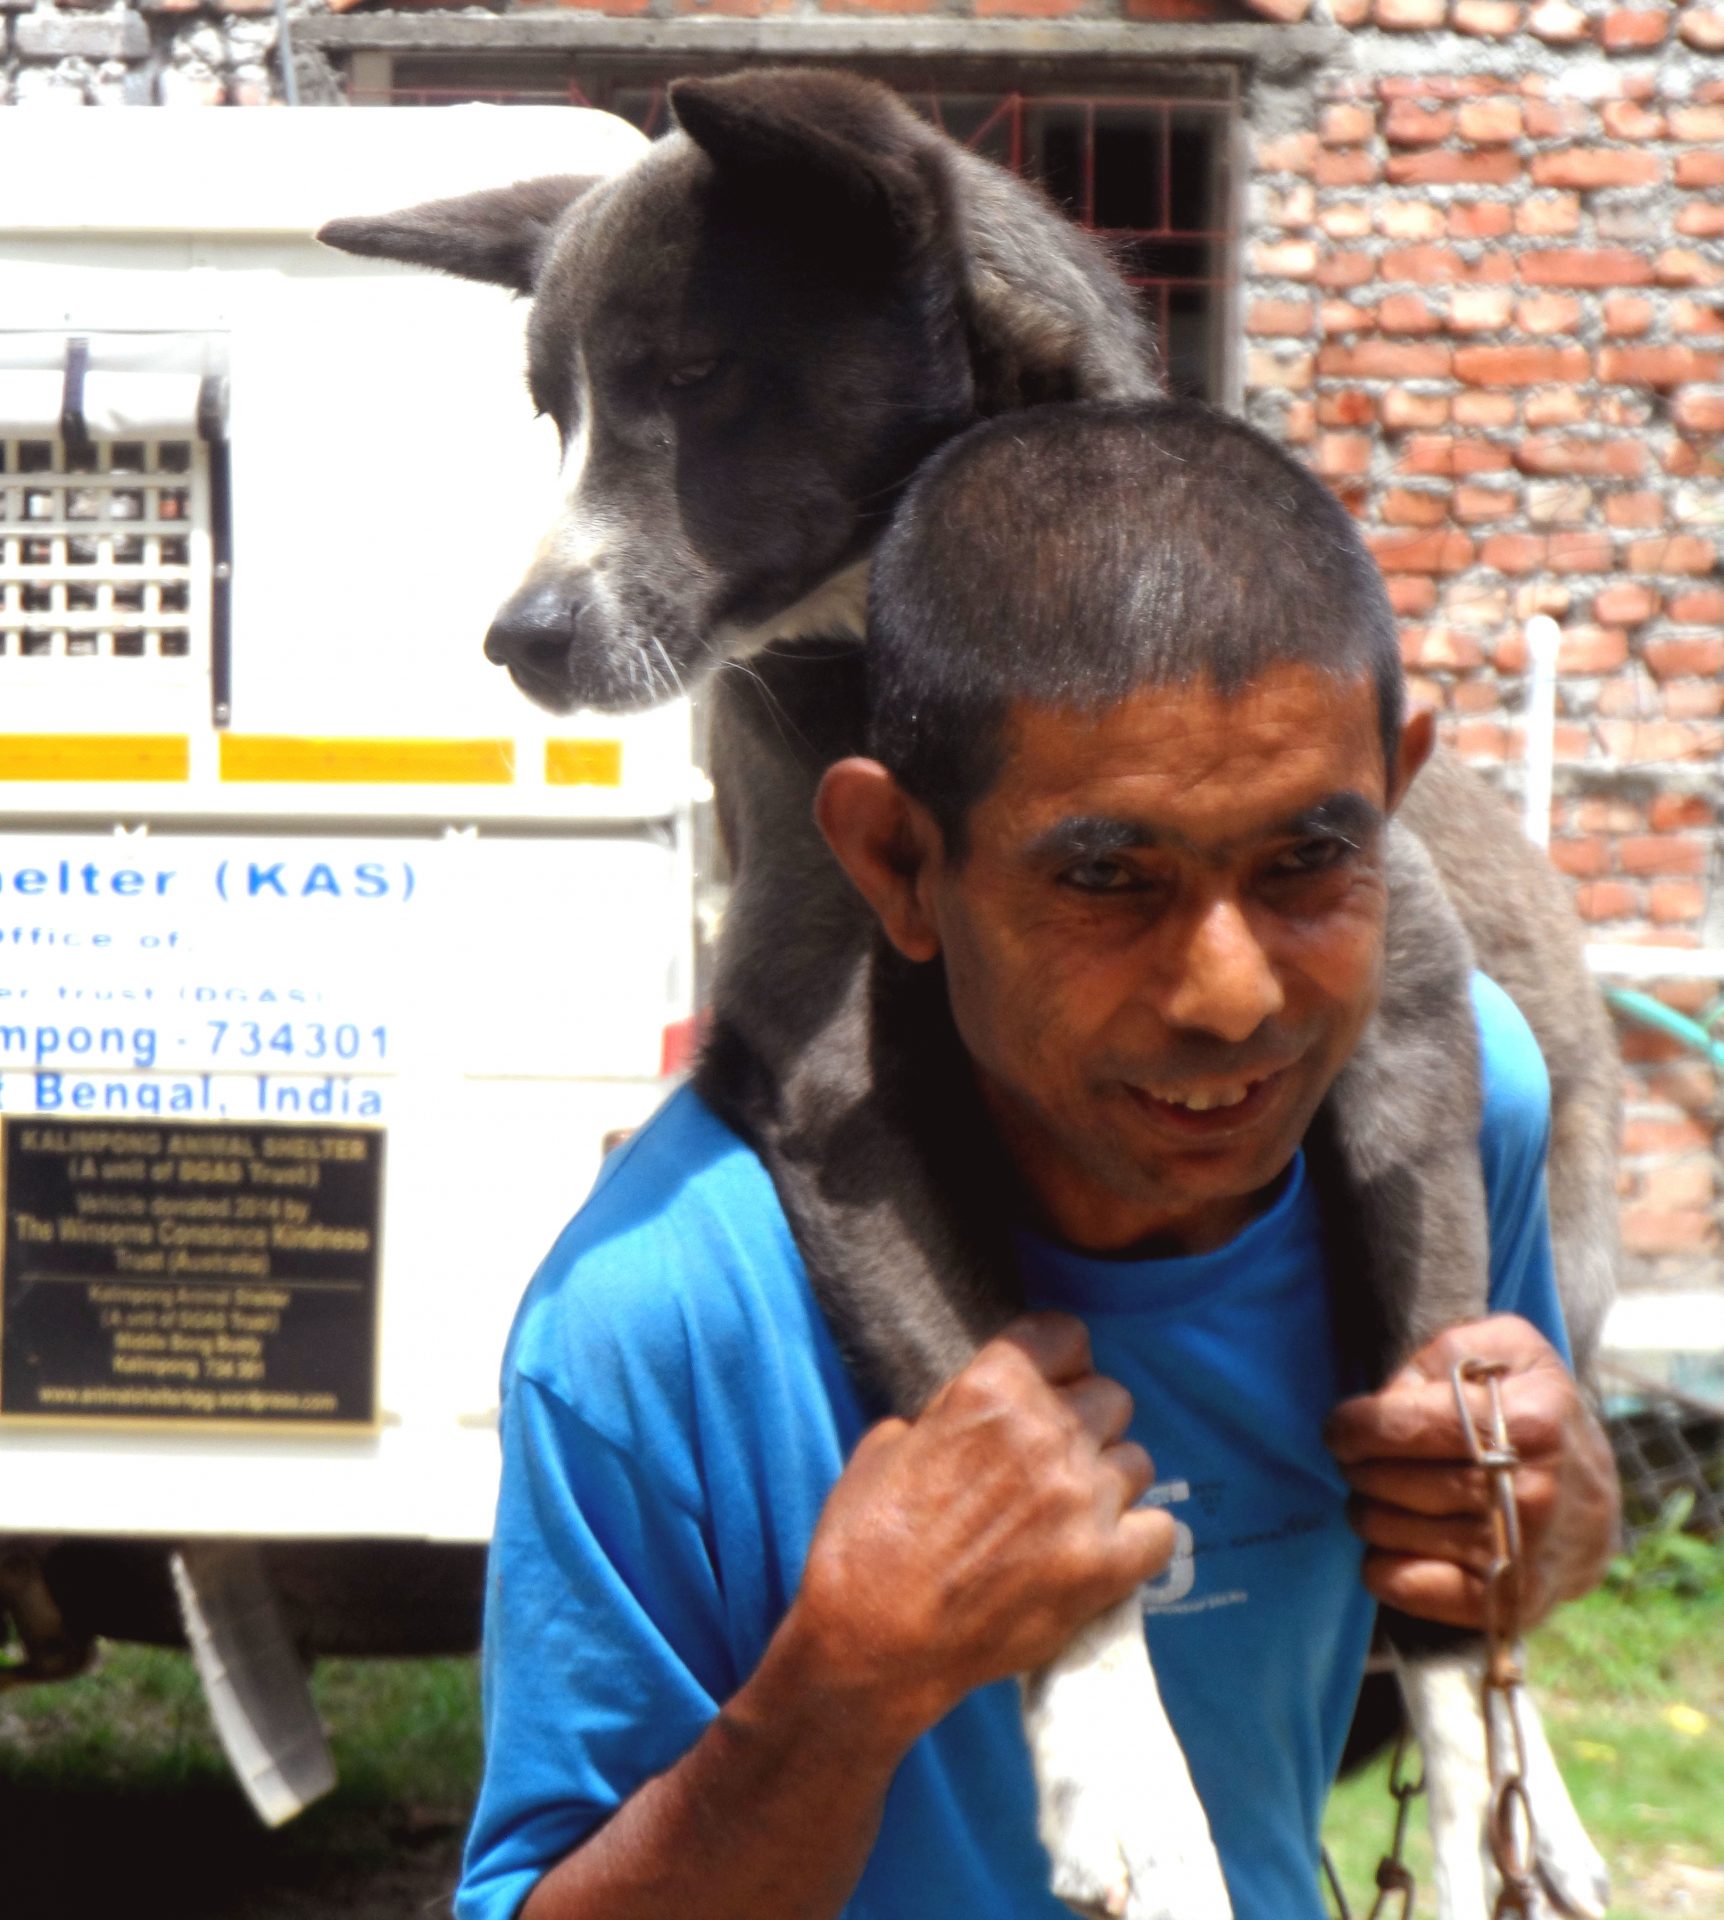 Happily carrying a dog after her health check-up is done at Village ABC camp by KAS